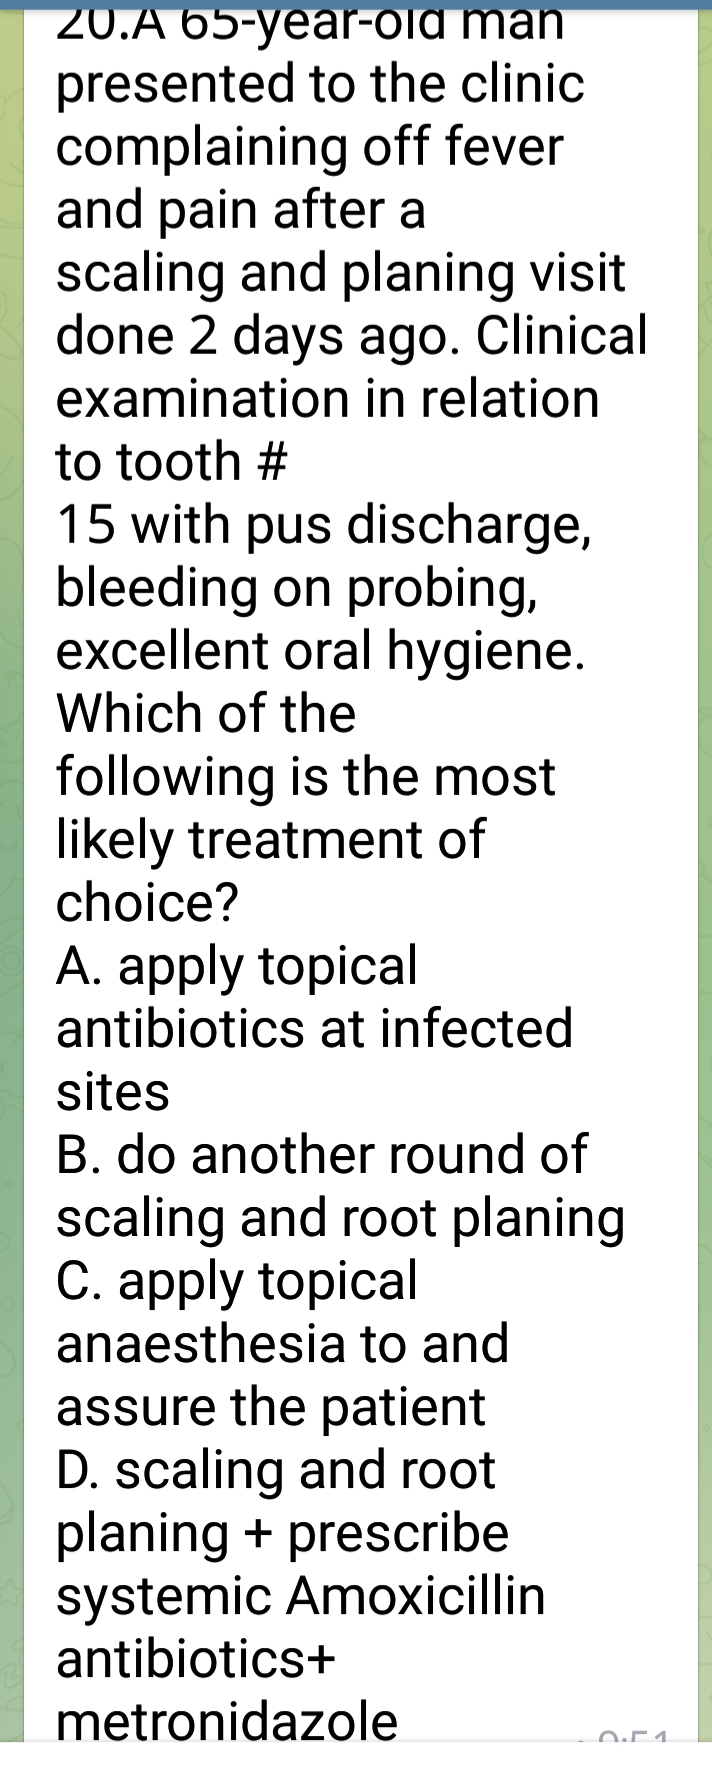 20.A 65-year-old man
presented to the clinic
complaining off fever
and pain after a
scaling and planing visit
done 2 days ago. Clinical
examination in relation
to tooth #
15 with pus discharge,
bleeding on probing,
excellent oral hygiene.
Which of the
following is the most
likely treatment of
choice?
A. apply topical
antibiotics at infected
sites
B. do another round of
scaling and root planing
C. apply topical
anaesthesia to and
assure the patient
D. scaling and root
planing + prescribe
systemic Amoxicillin
antibiotics+
metronidazole
